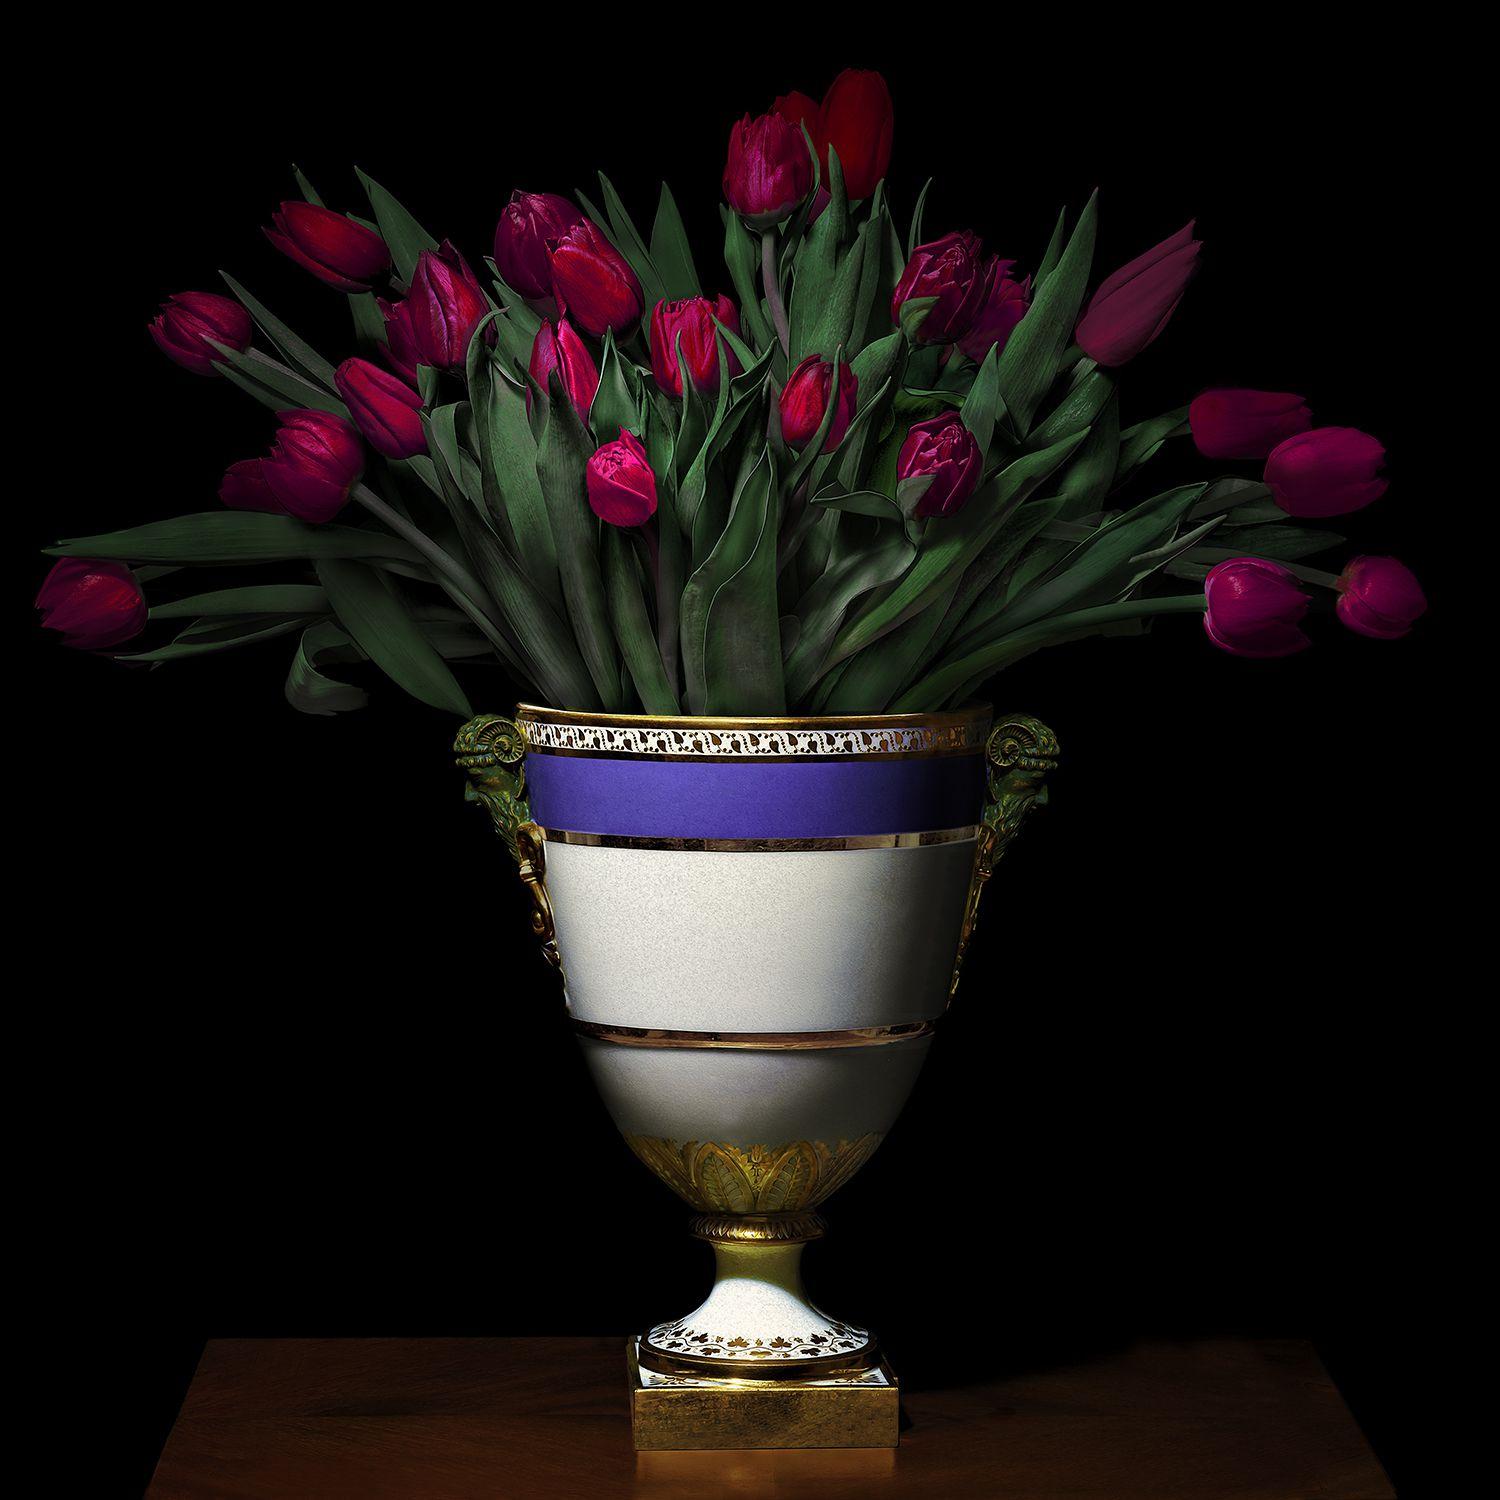 Tulips in a Blue, White, and Gold Vessel - Photograph by T.M. Glass